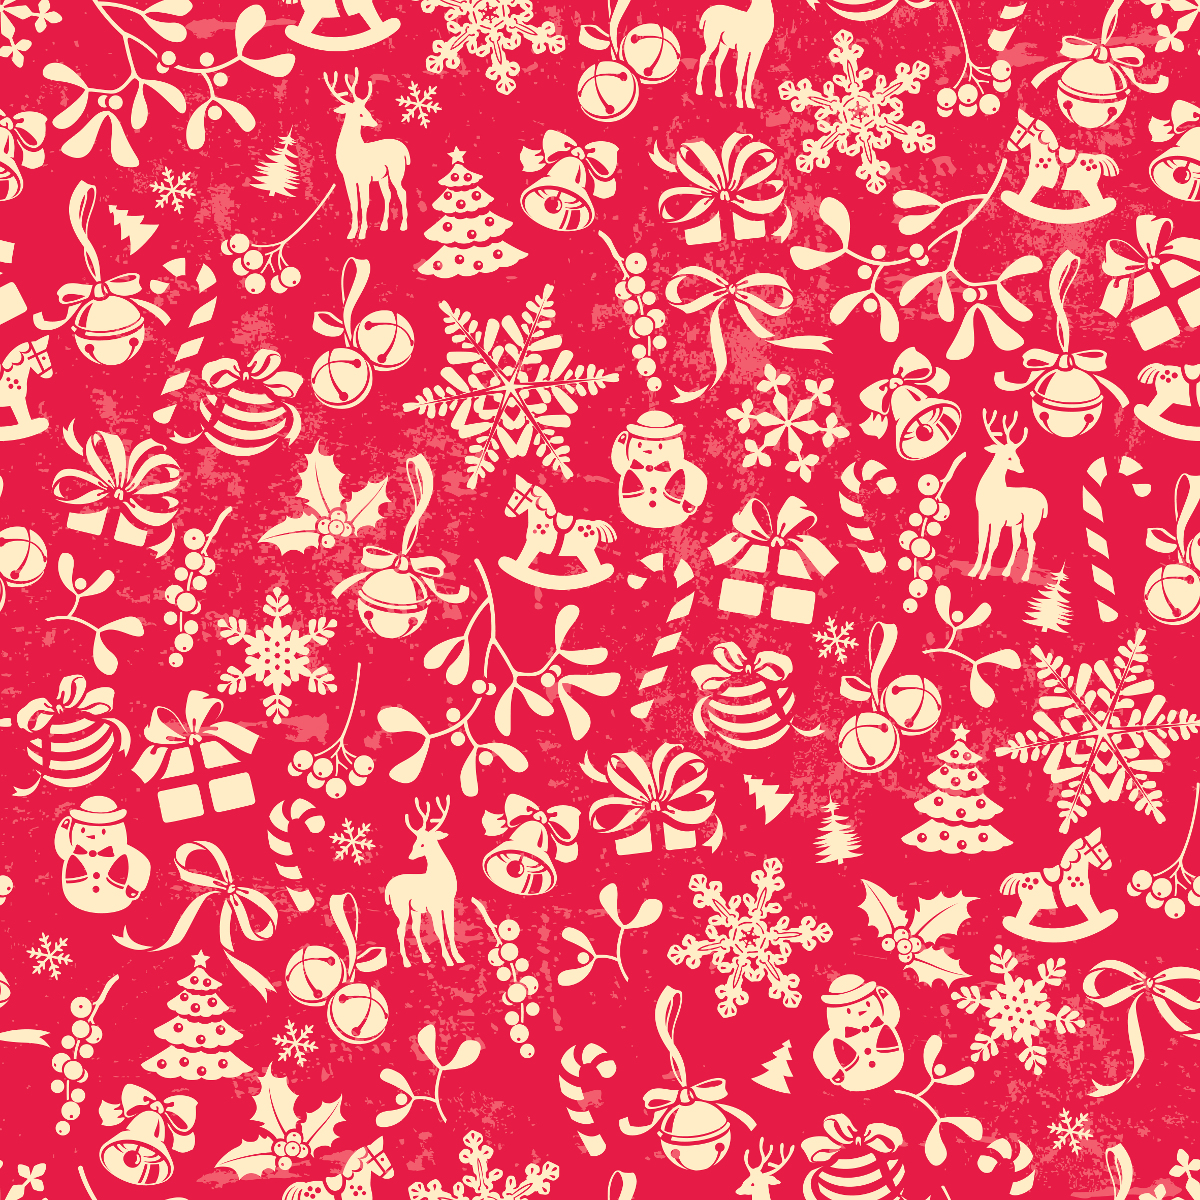 wrapping paper wallpaper,pattern,red,pink,wrapping paper,textile